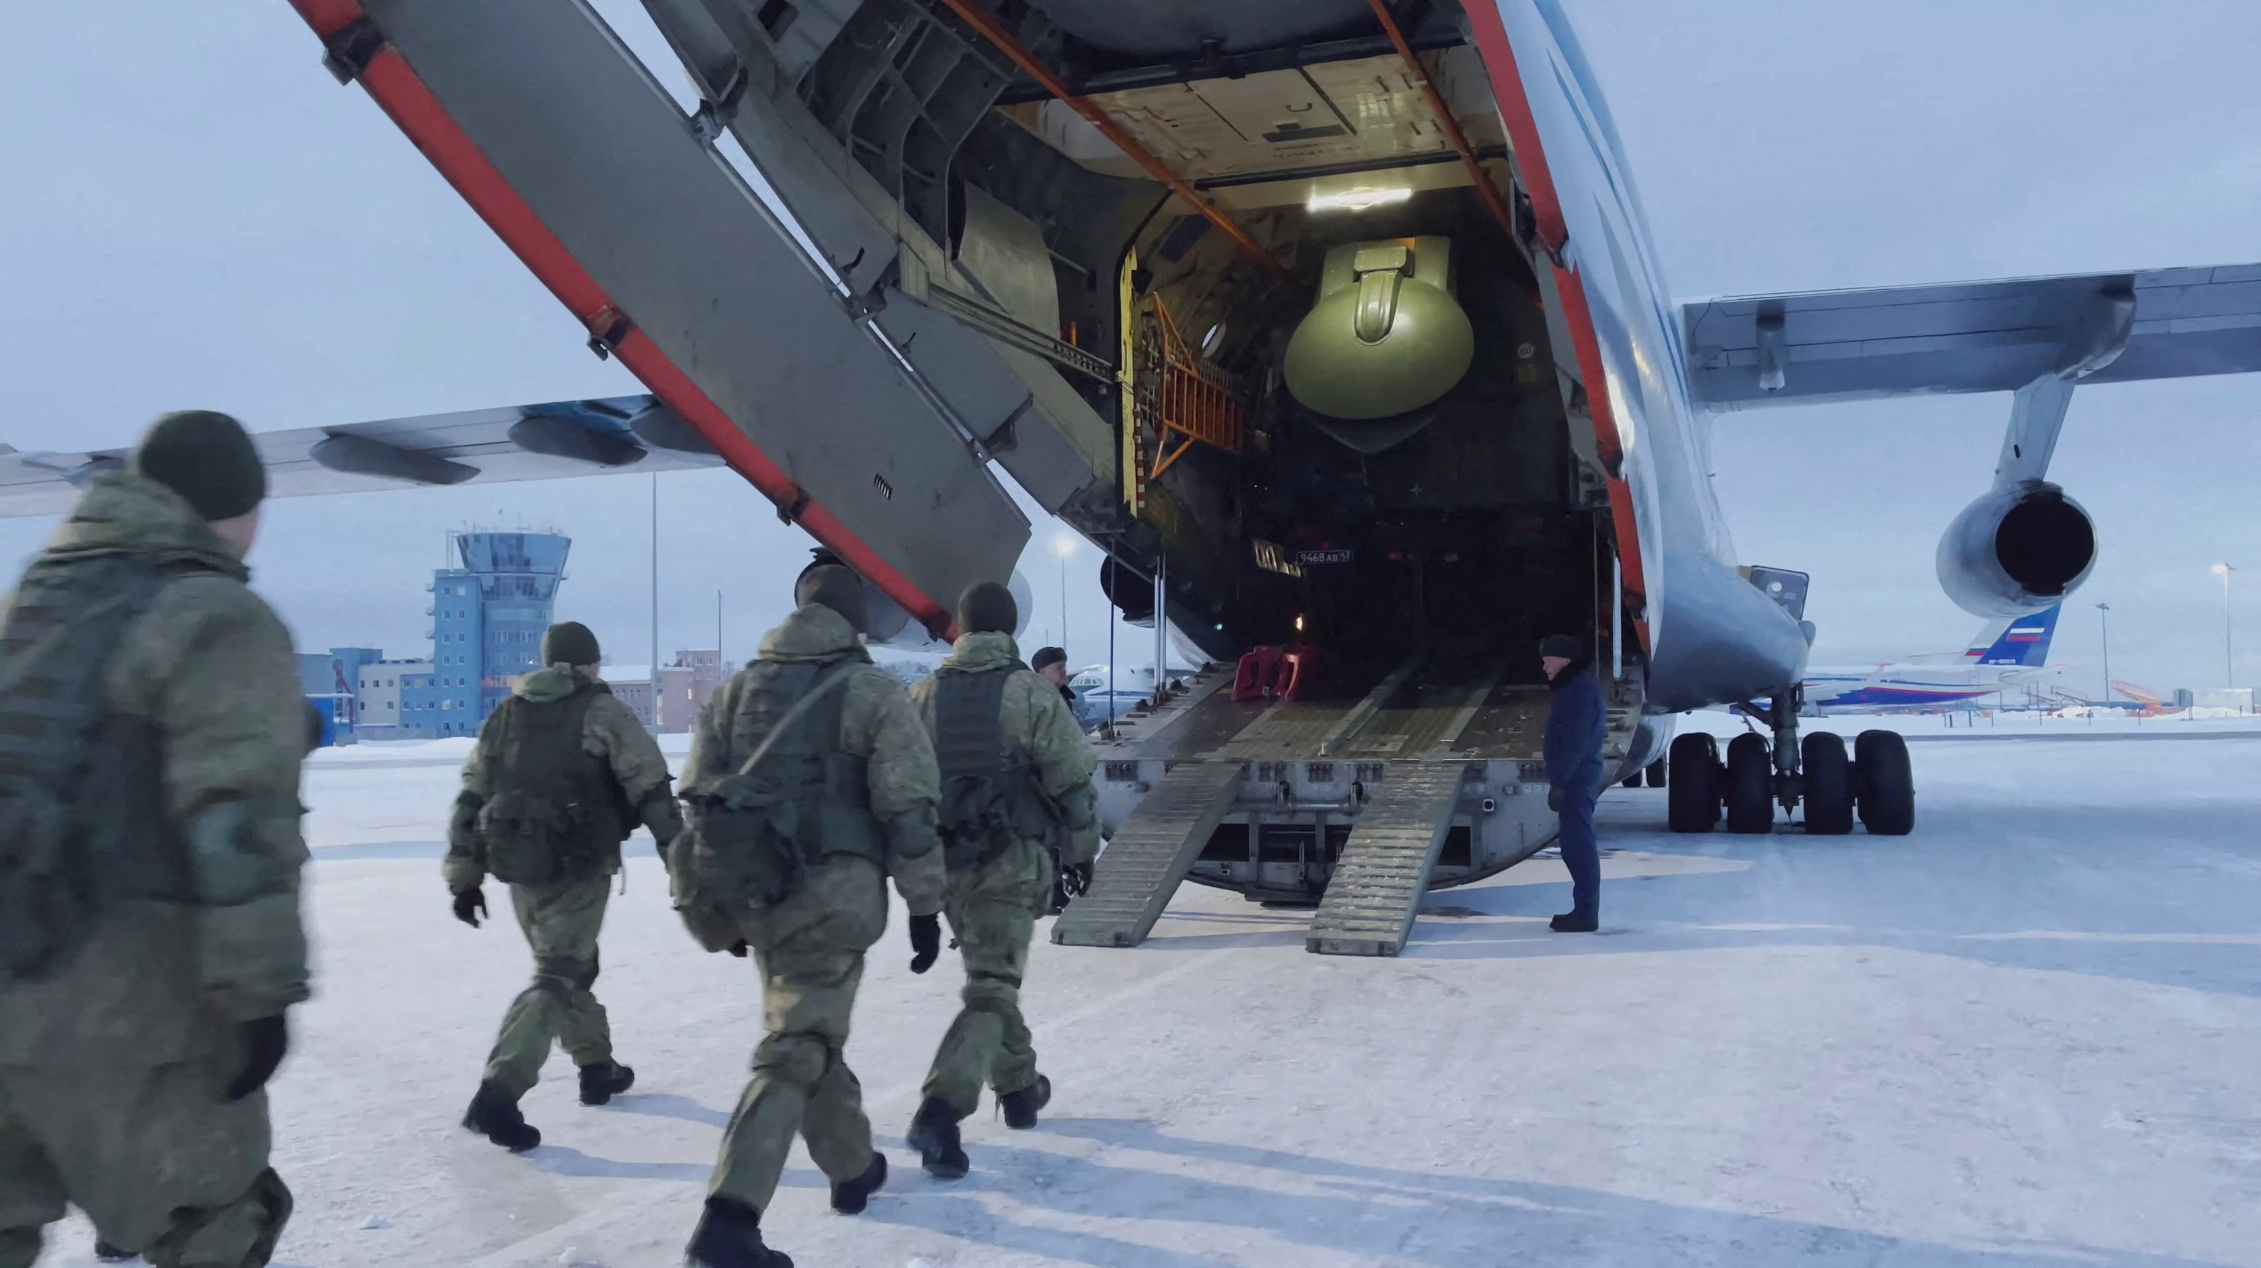 Russian servicemen board a military aircraft heading to Kazakhstan, at an airfield outside Moscow